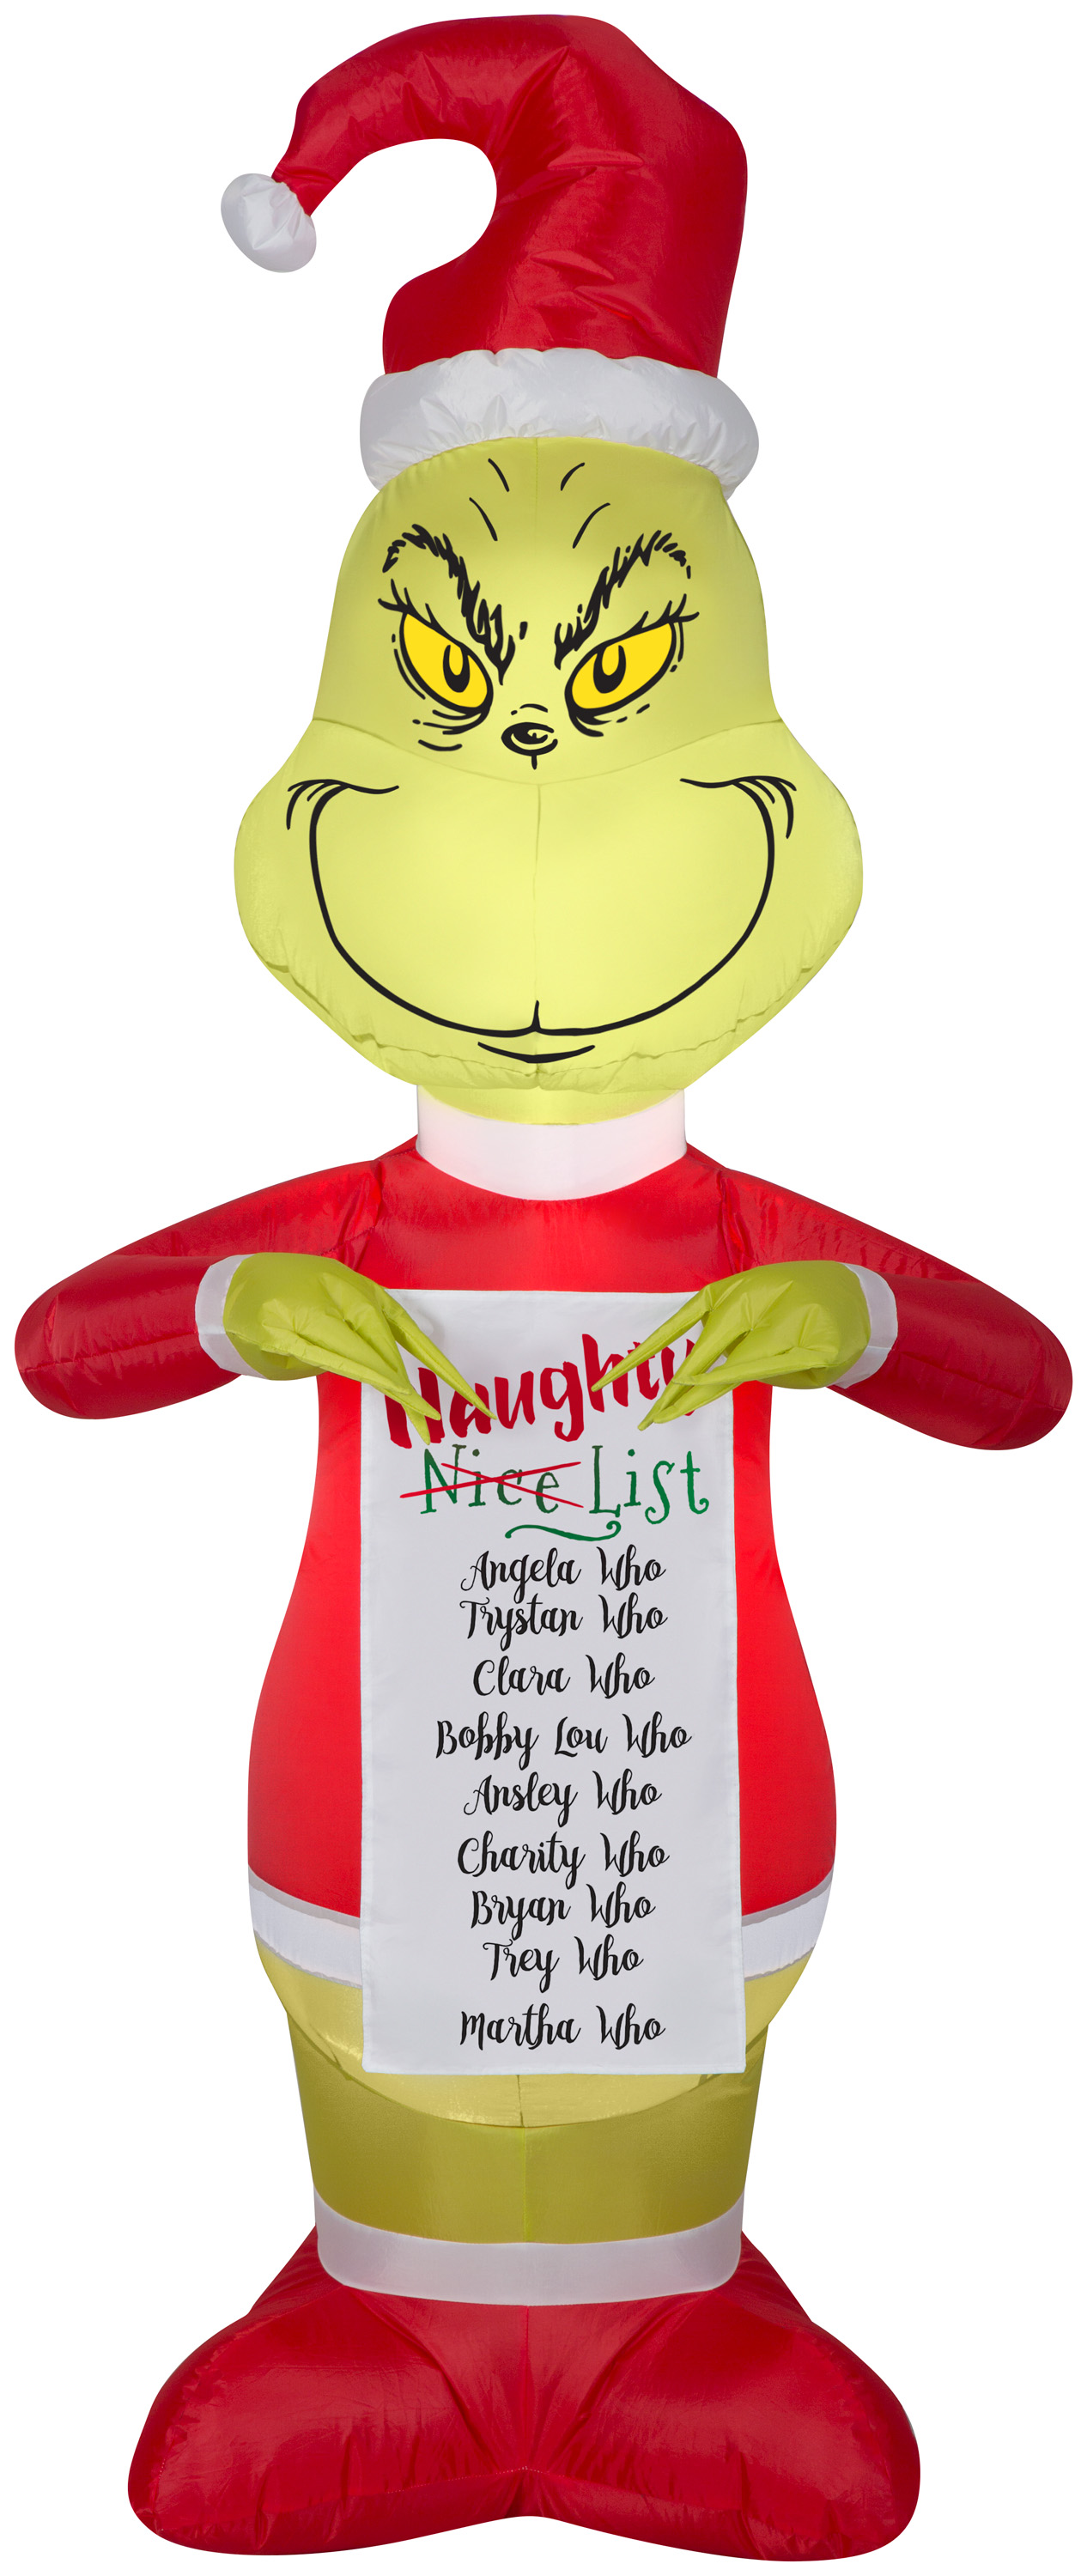 Dr. Seuss The Grinch Naughty List 5.5ft tall by Gemmy Industries - image 1 of 6